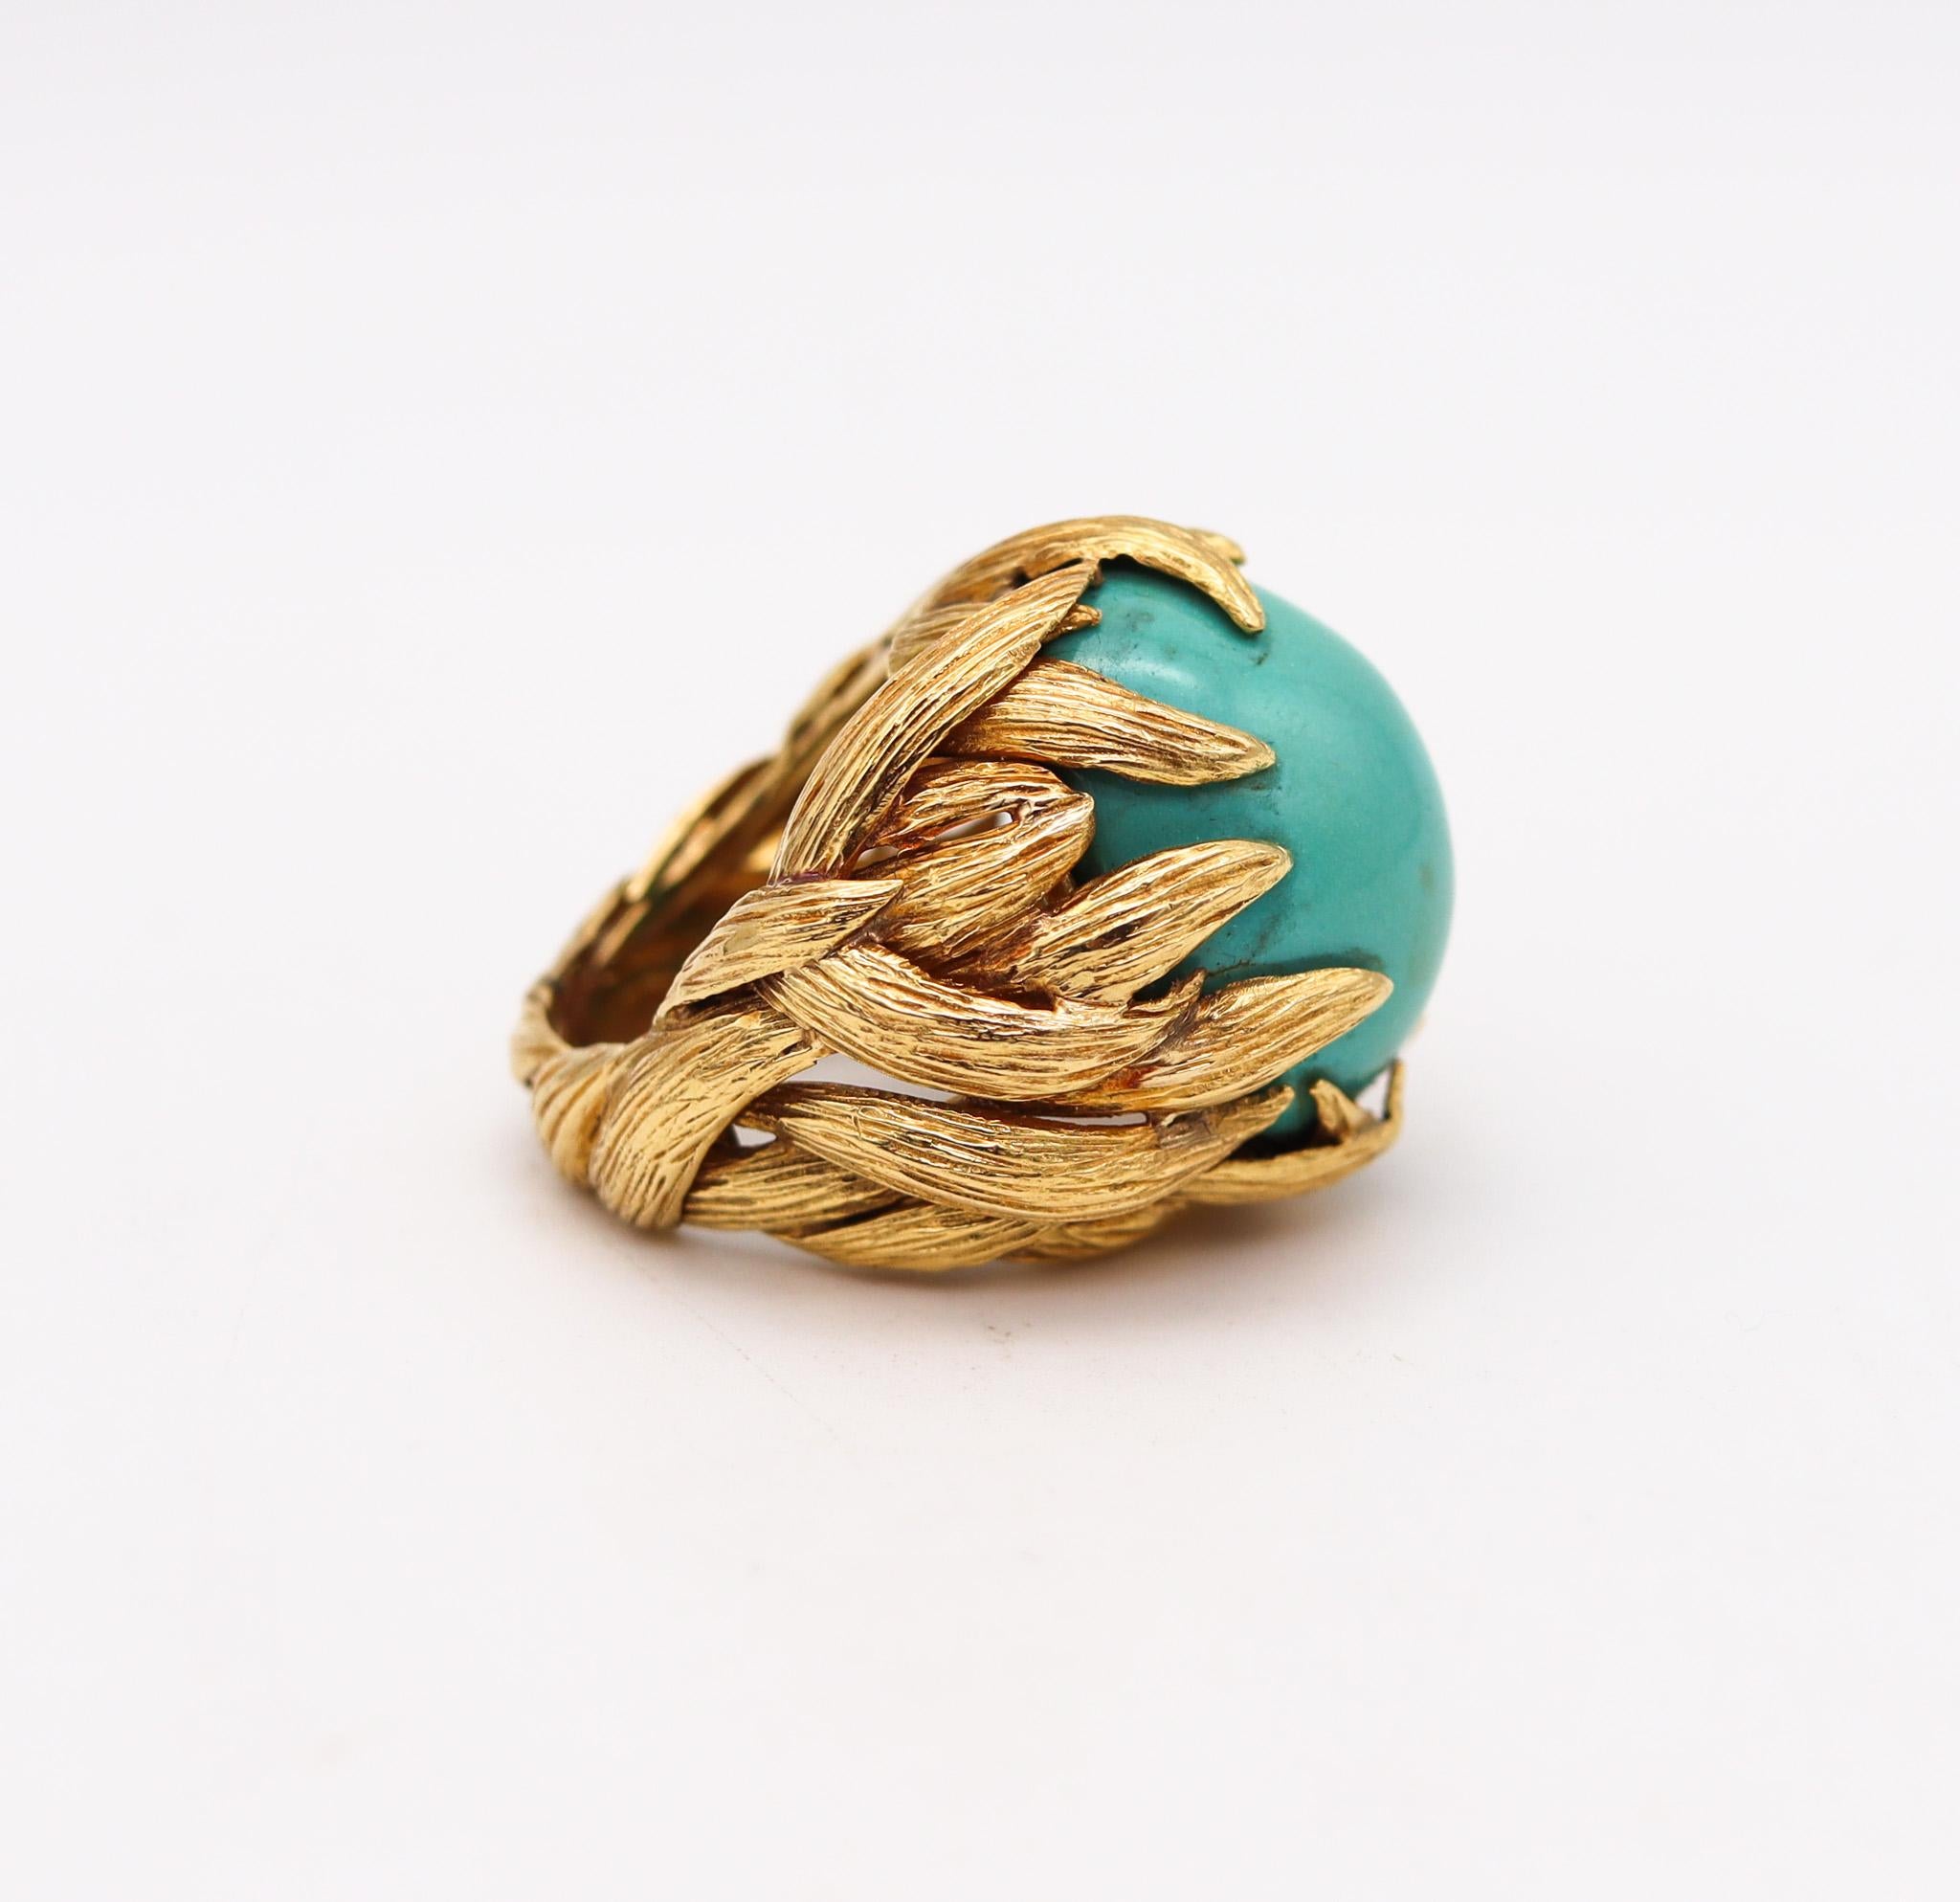 Retro David Webb 1970 New York Flames Cocktail Ring 18kt Gold with 40.82cts Turquoise